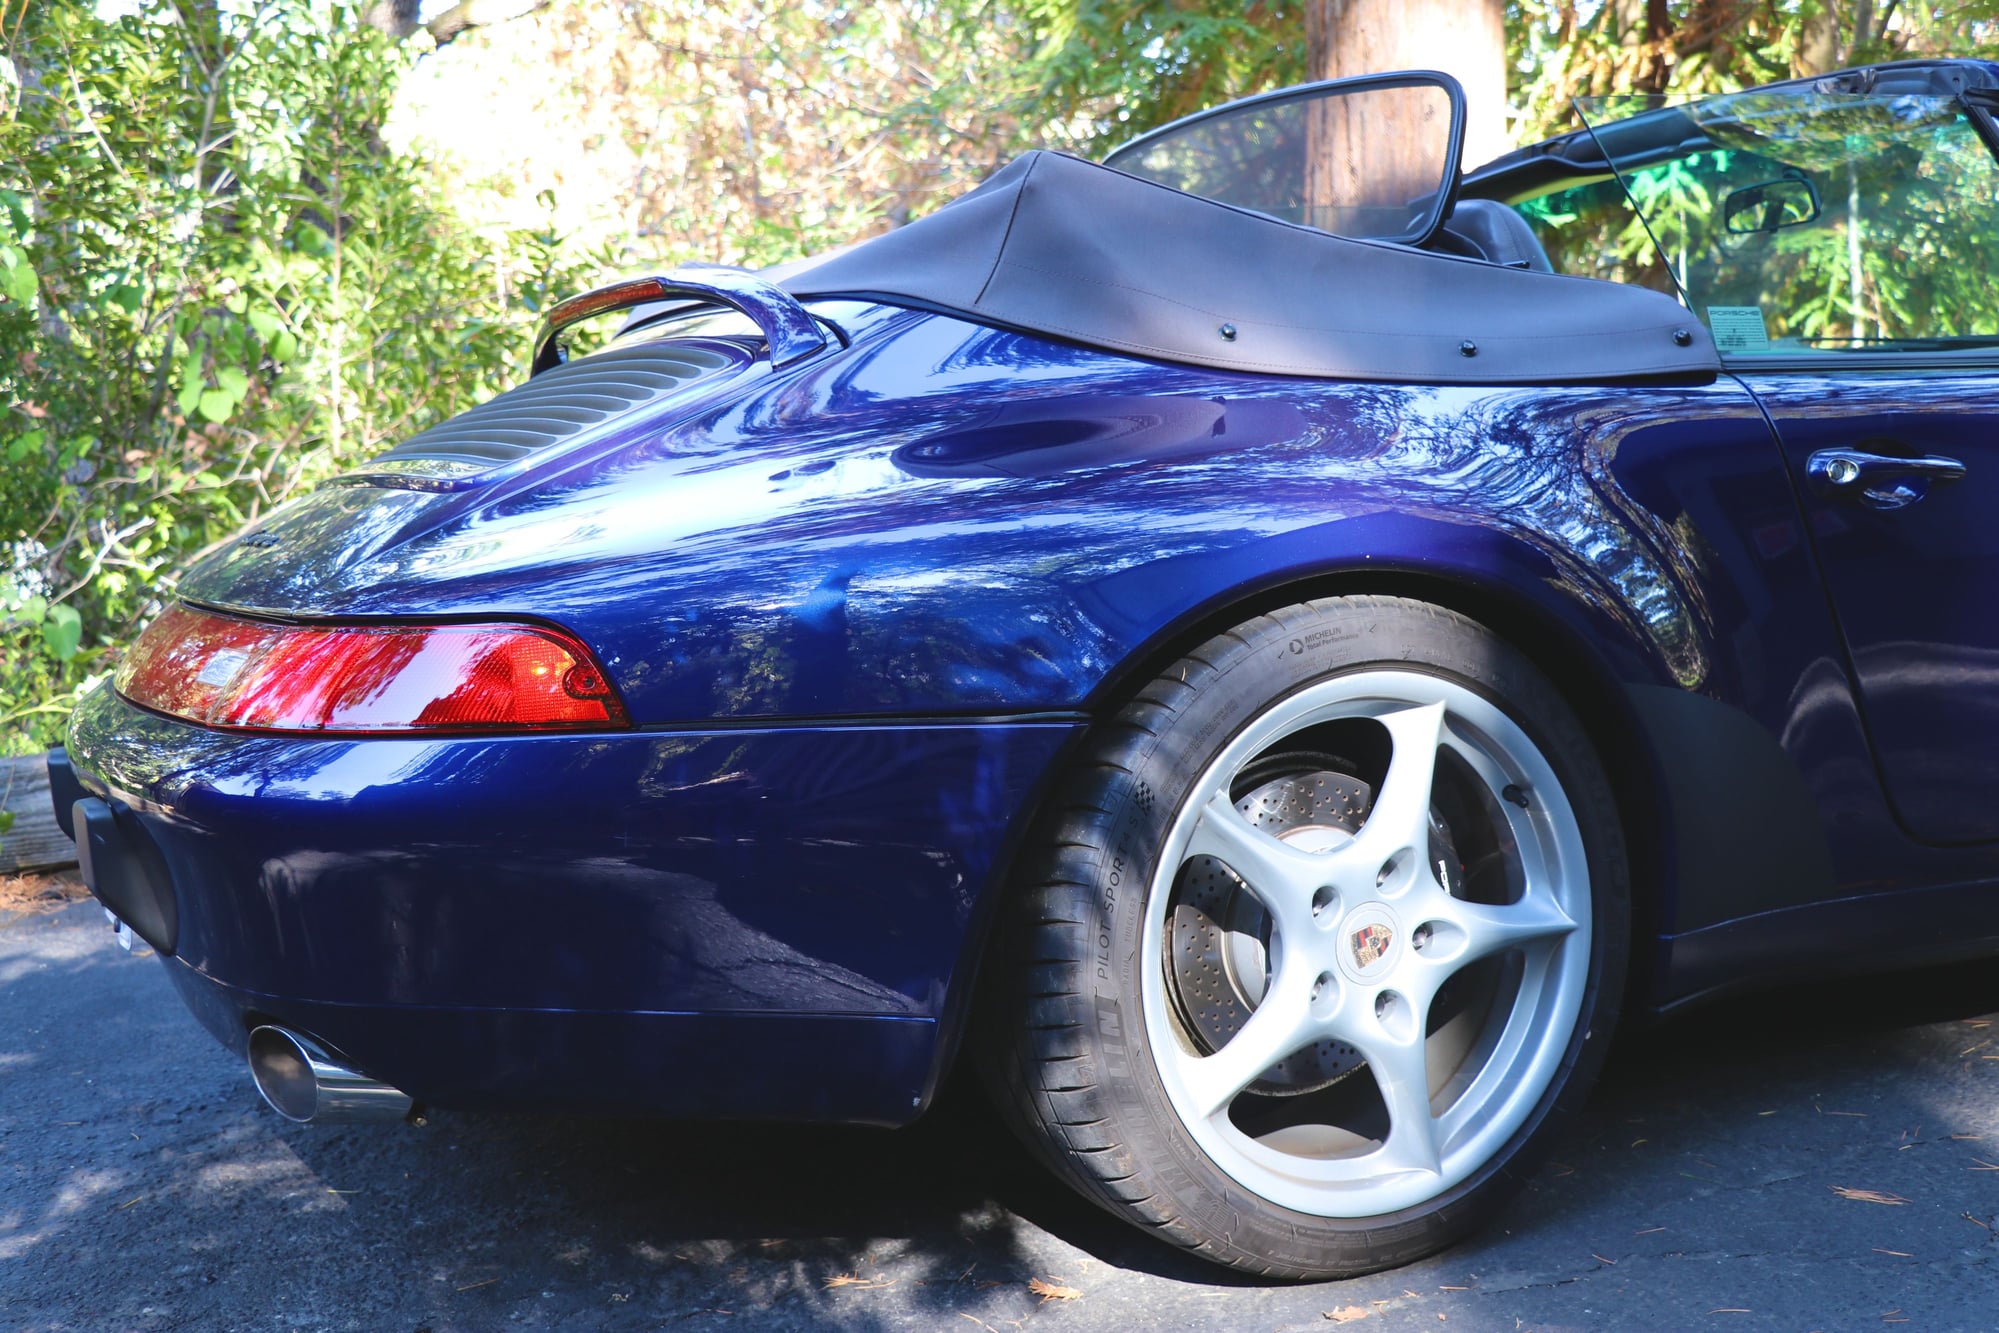 1995 Porsche 911 - **FOR SALE** Iris Blue over Classic Grey 1995 Carrera 2 Cabriolet - New Top! - Used - VIN WP0CA2999SS340410 - 87,000 Miles - 6 cyl - 2WD - Manual - Convertible - Blue - Lafayette, CA 94549, United States